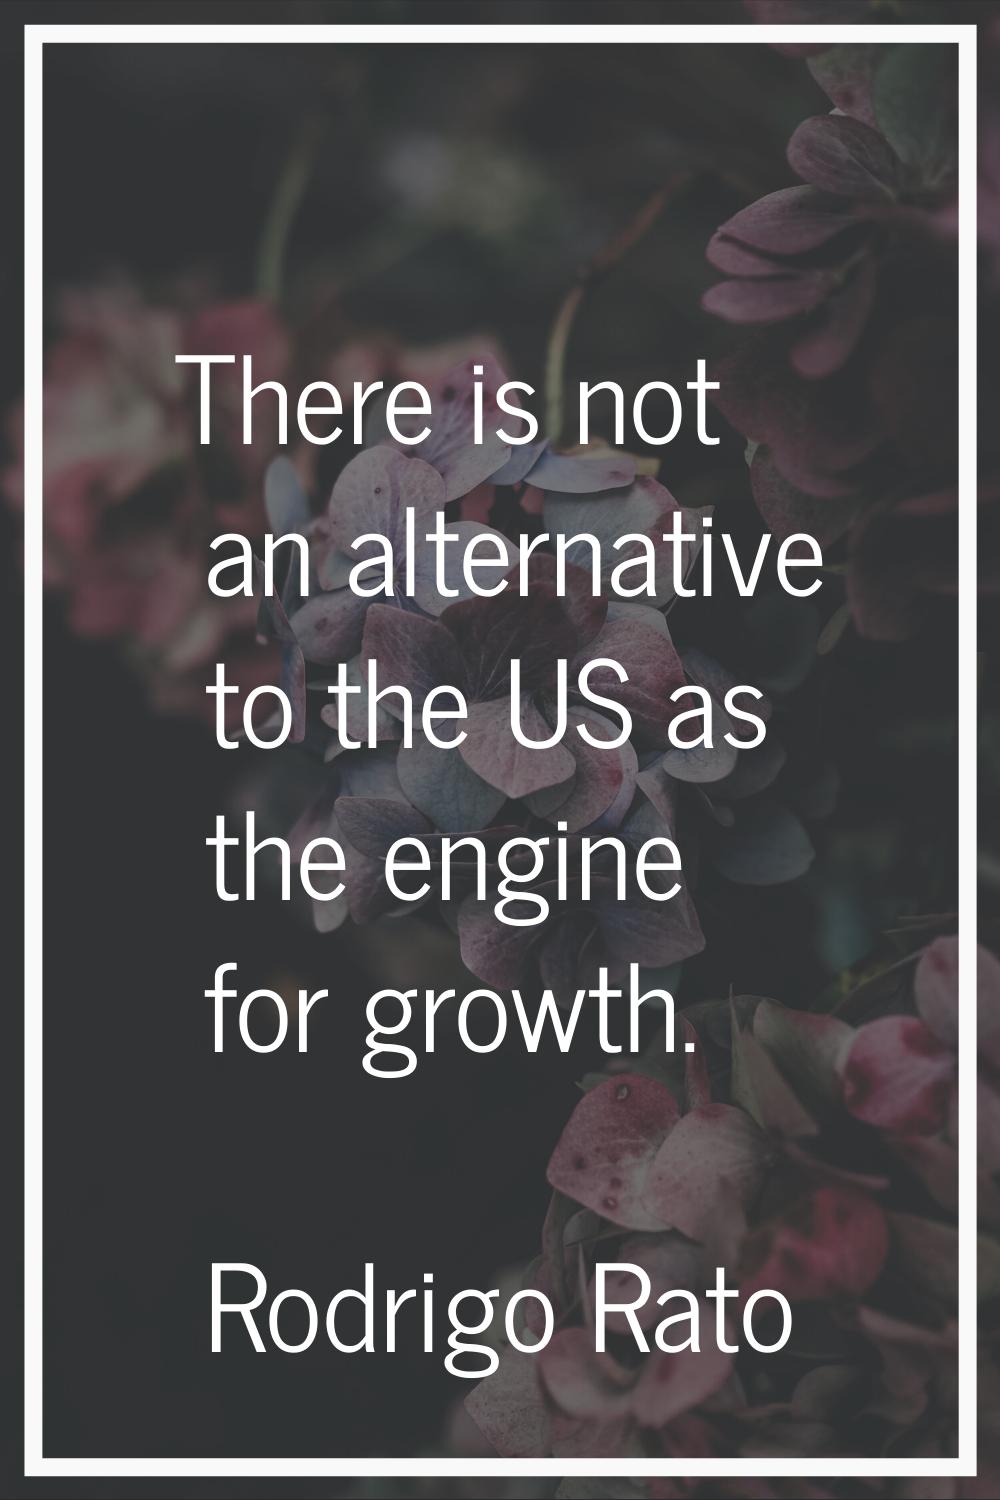 There is not an alternative to the US as the engine for growth.